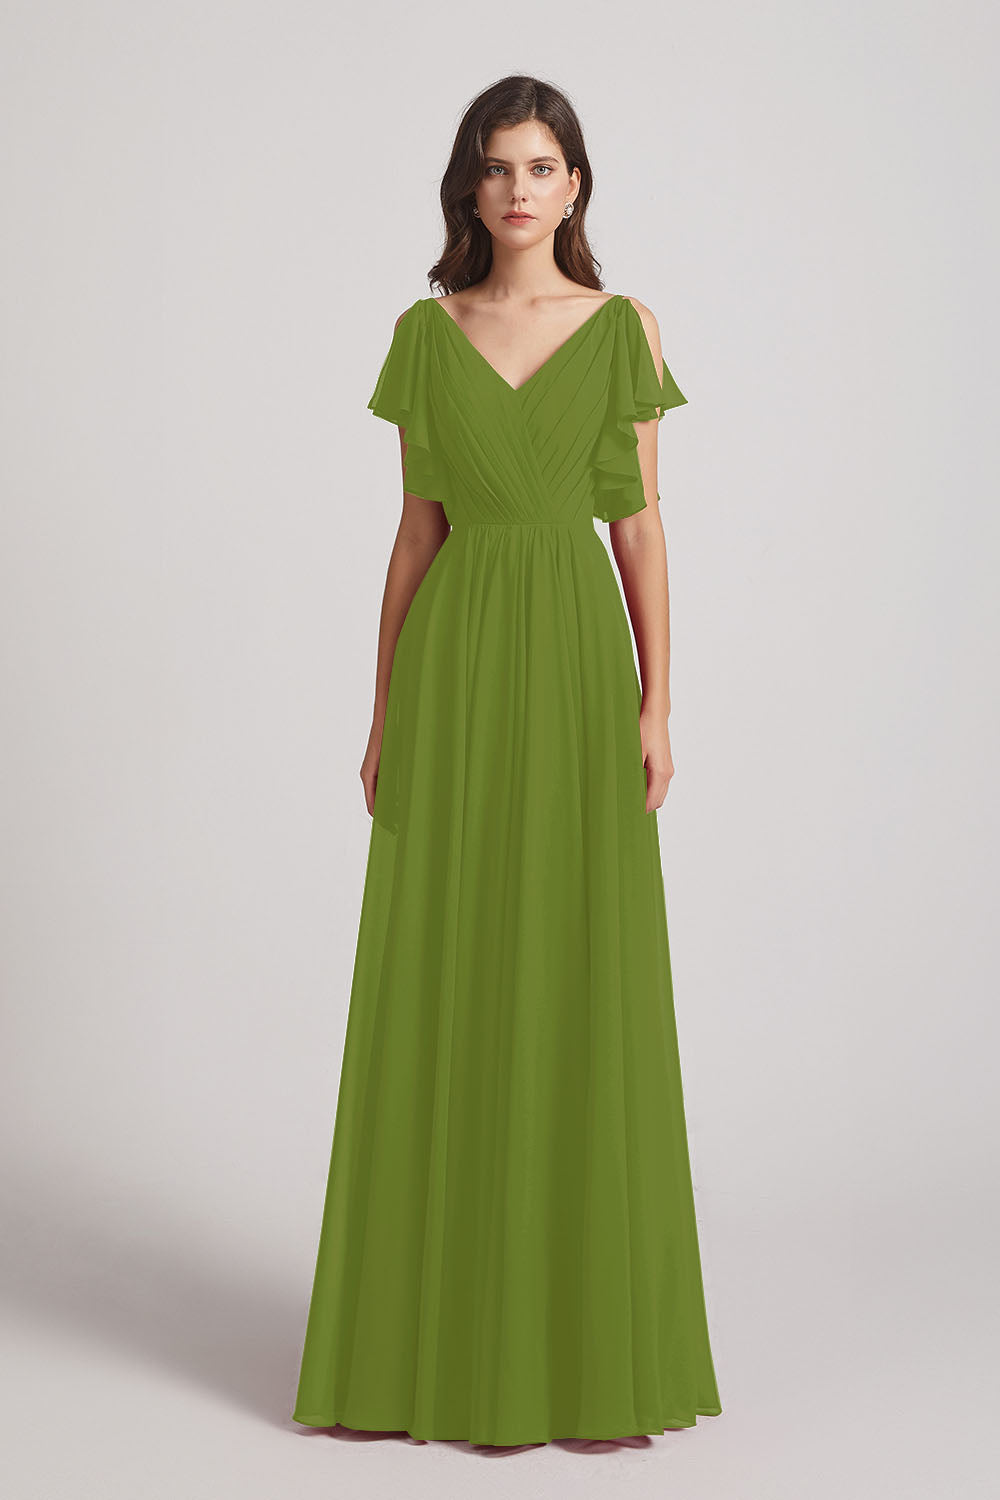 Alfa Bridal Olive Green V-Neck Pleated Chiffon Bridesmaid Dresses with Open Flutter Sleeves (AF0098)